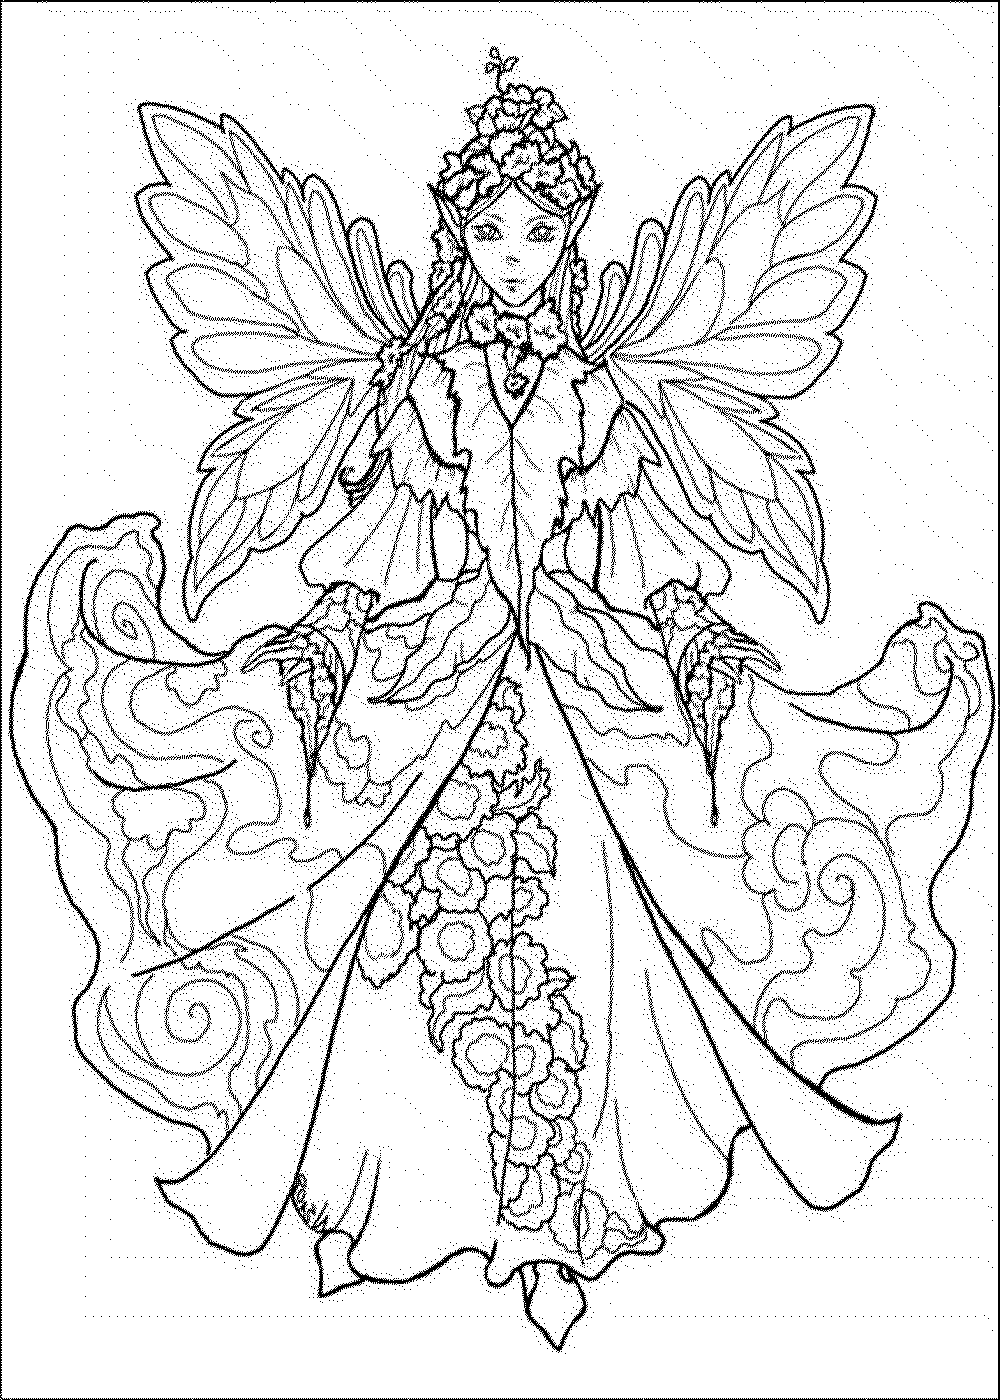 Cool Fairy Princess | Coloring Pages For Adults |Free coloring on Clipart Library